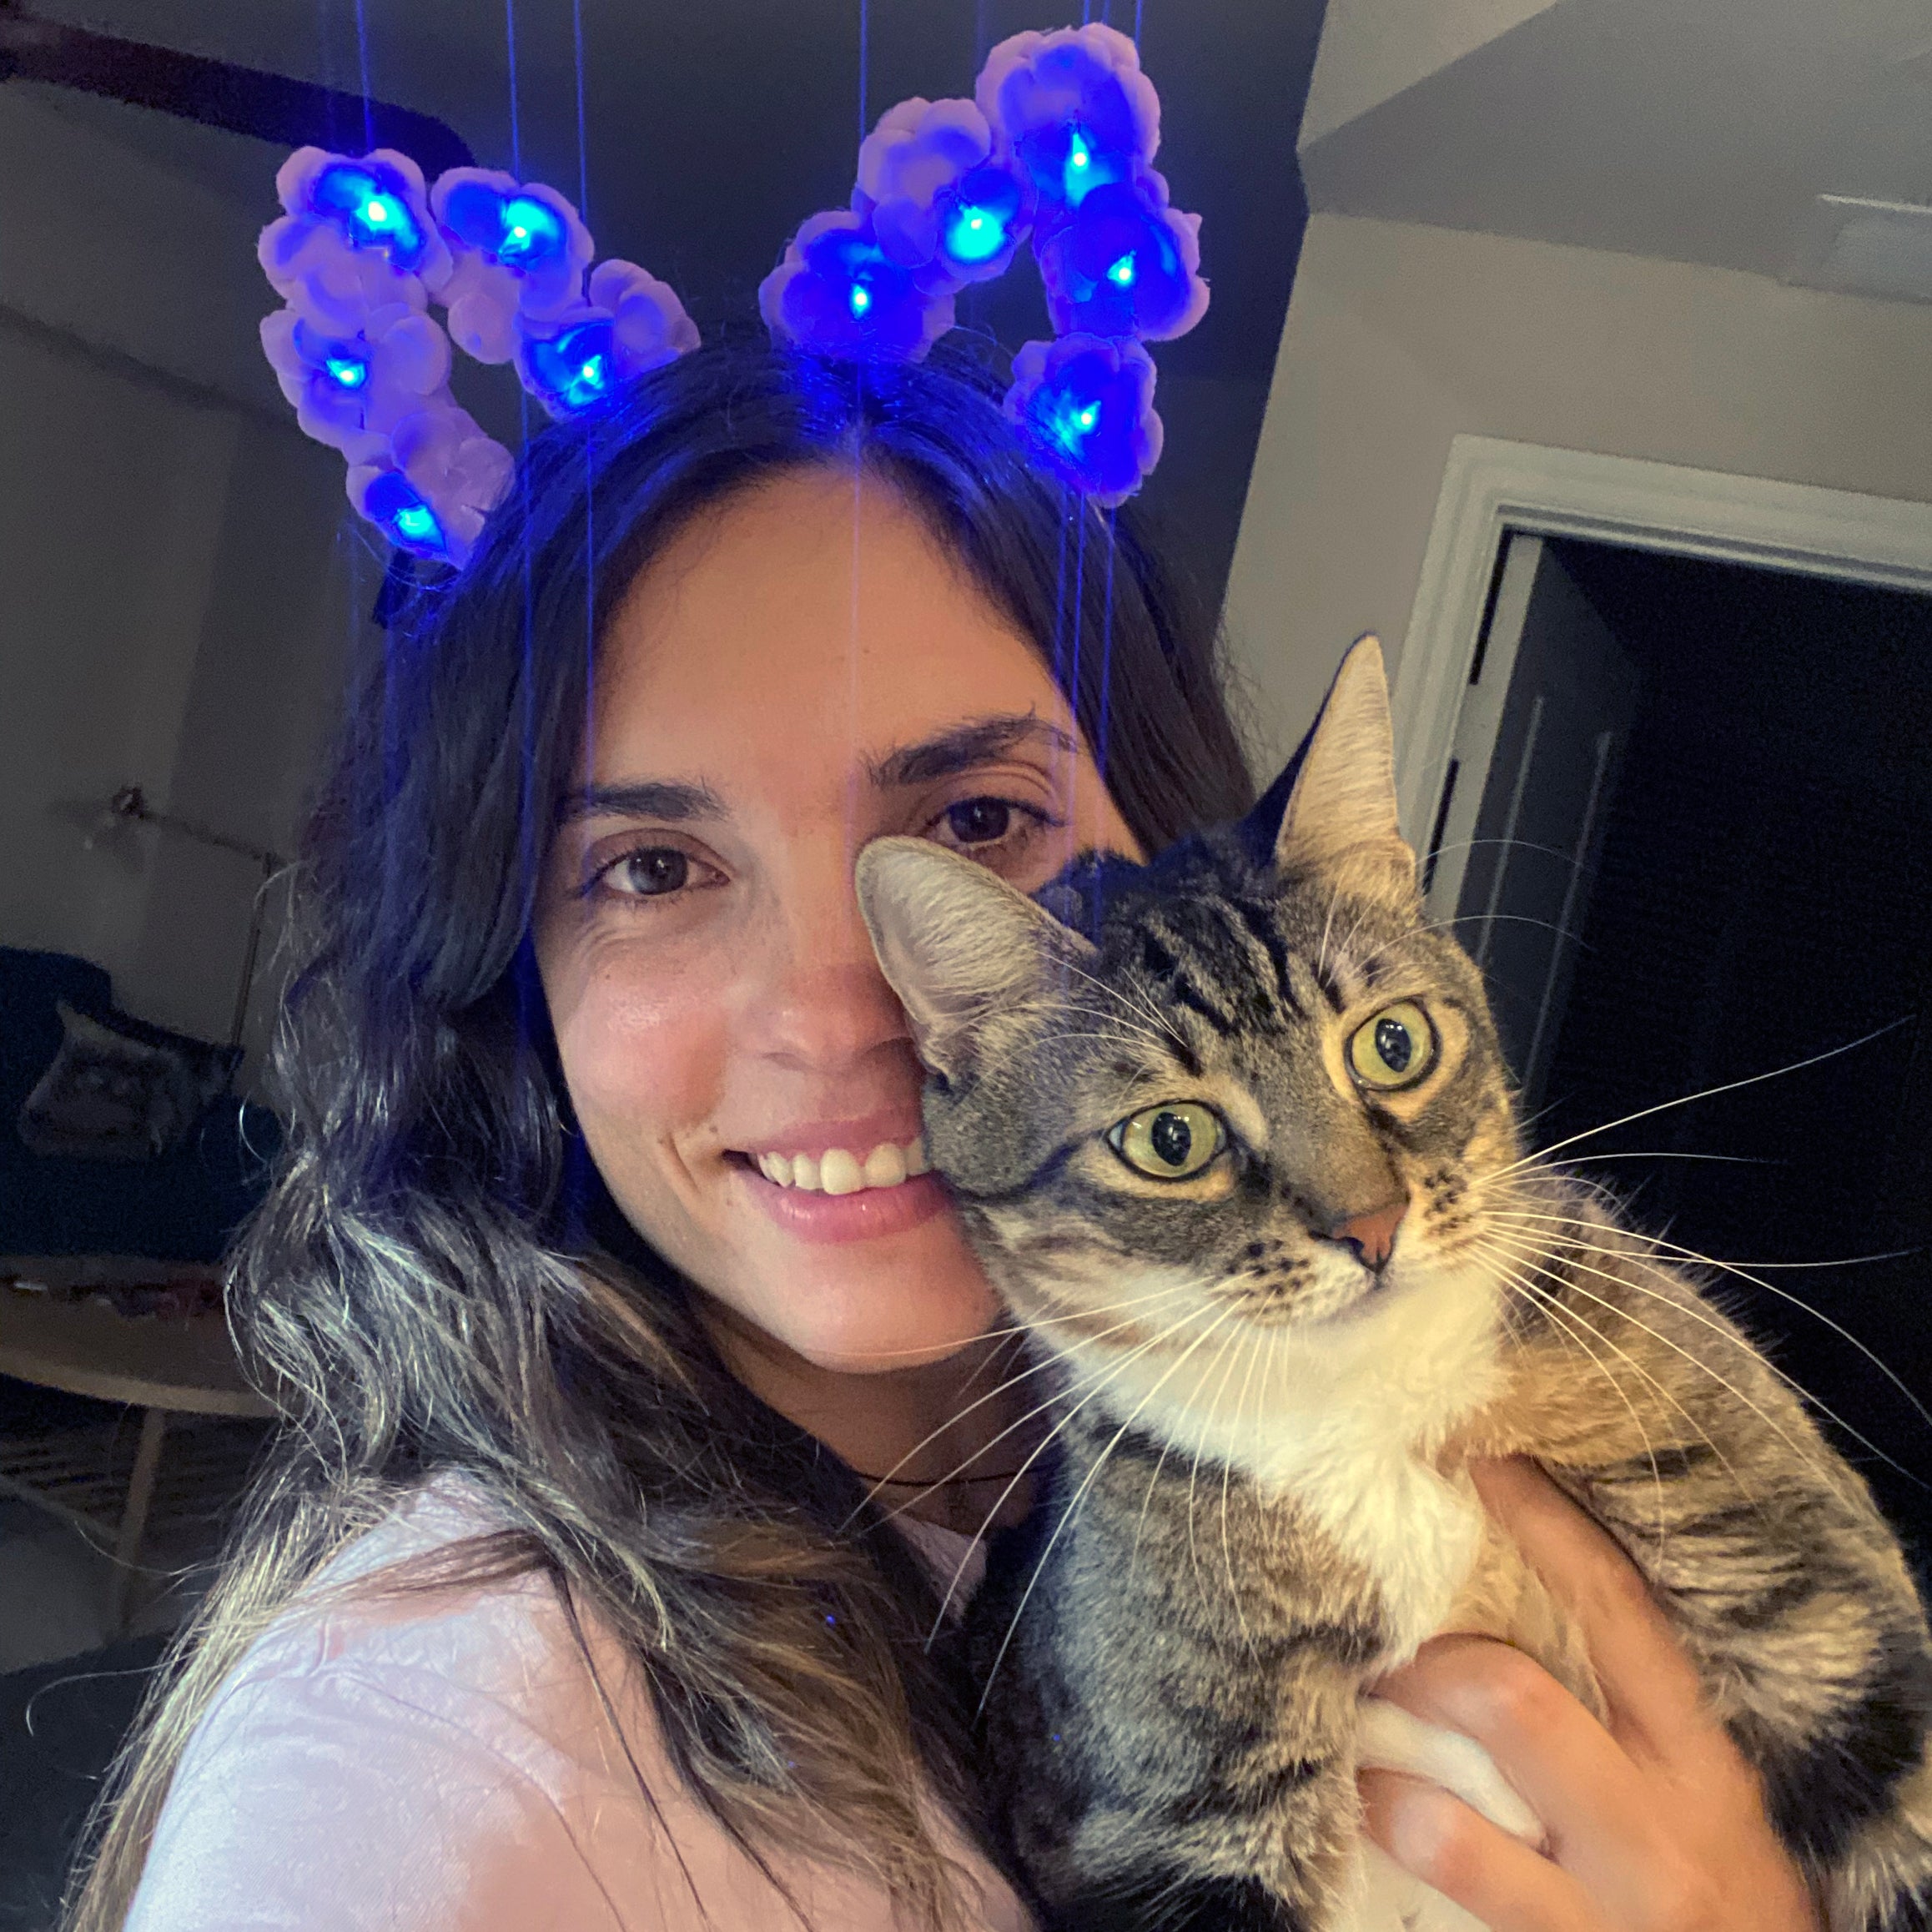 are the purrfect accessory for a party, event, festival, or just to wear it for a fun night out with your fellow cat ladies!